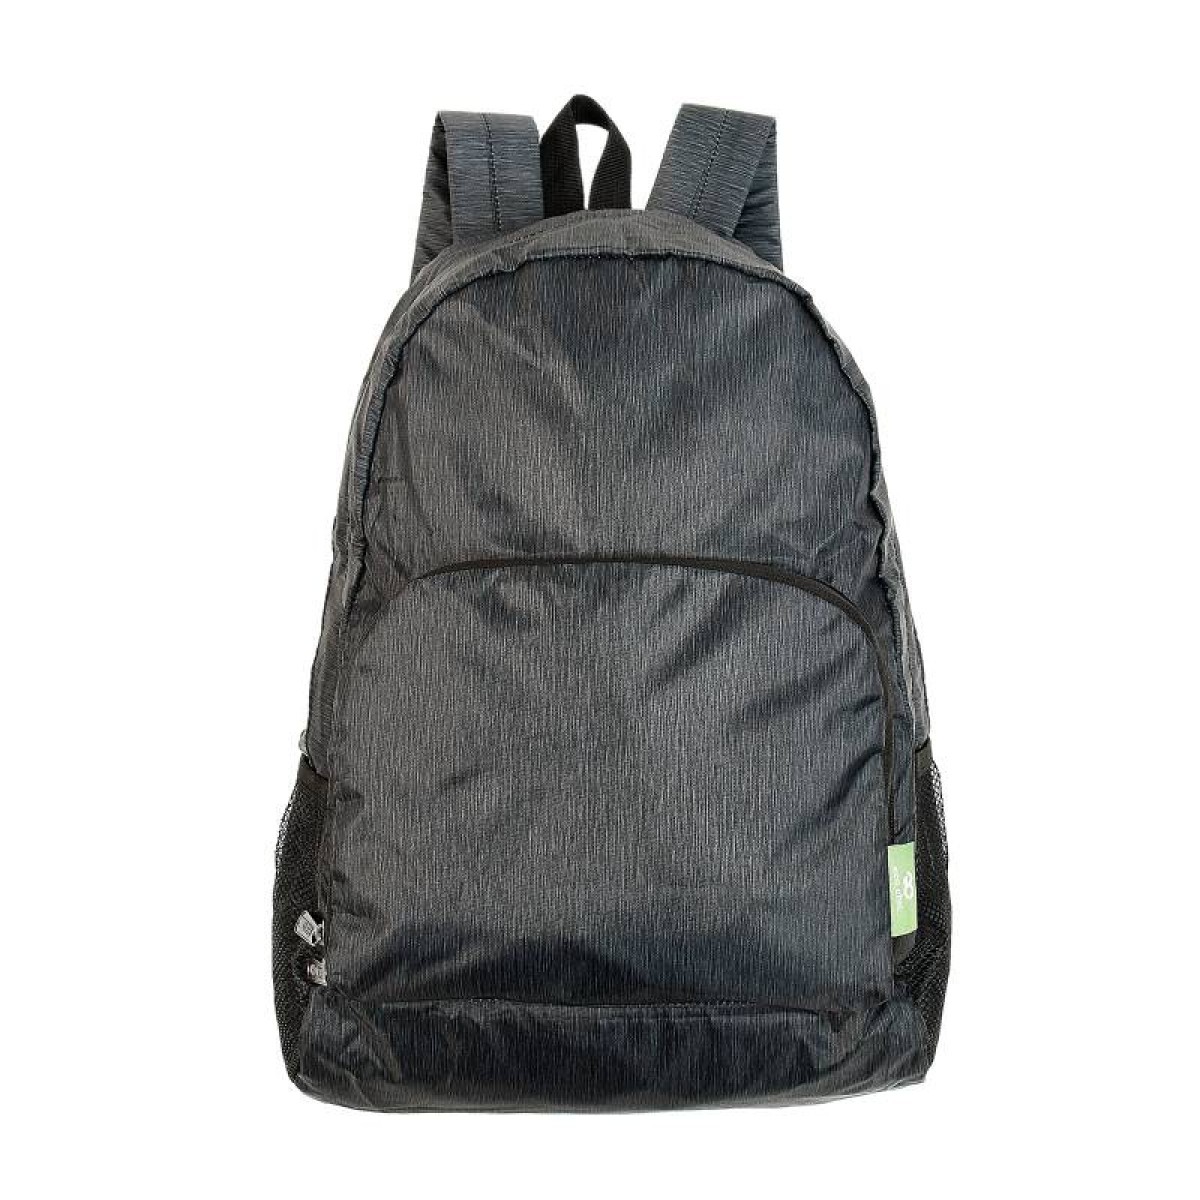 Eco Chic Lightweight Foldable Backpack - Black - Flagship Boutique